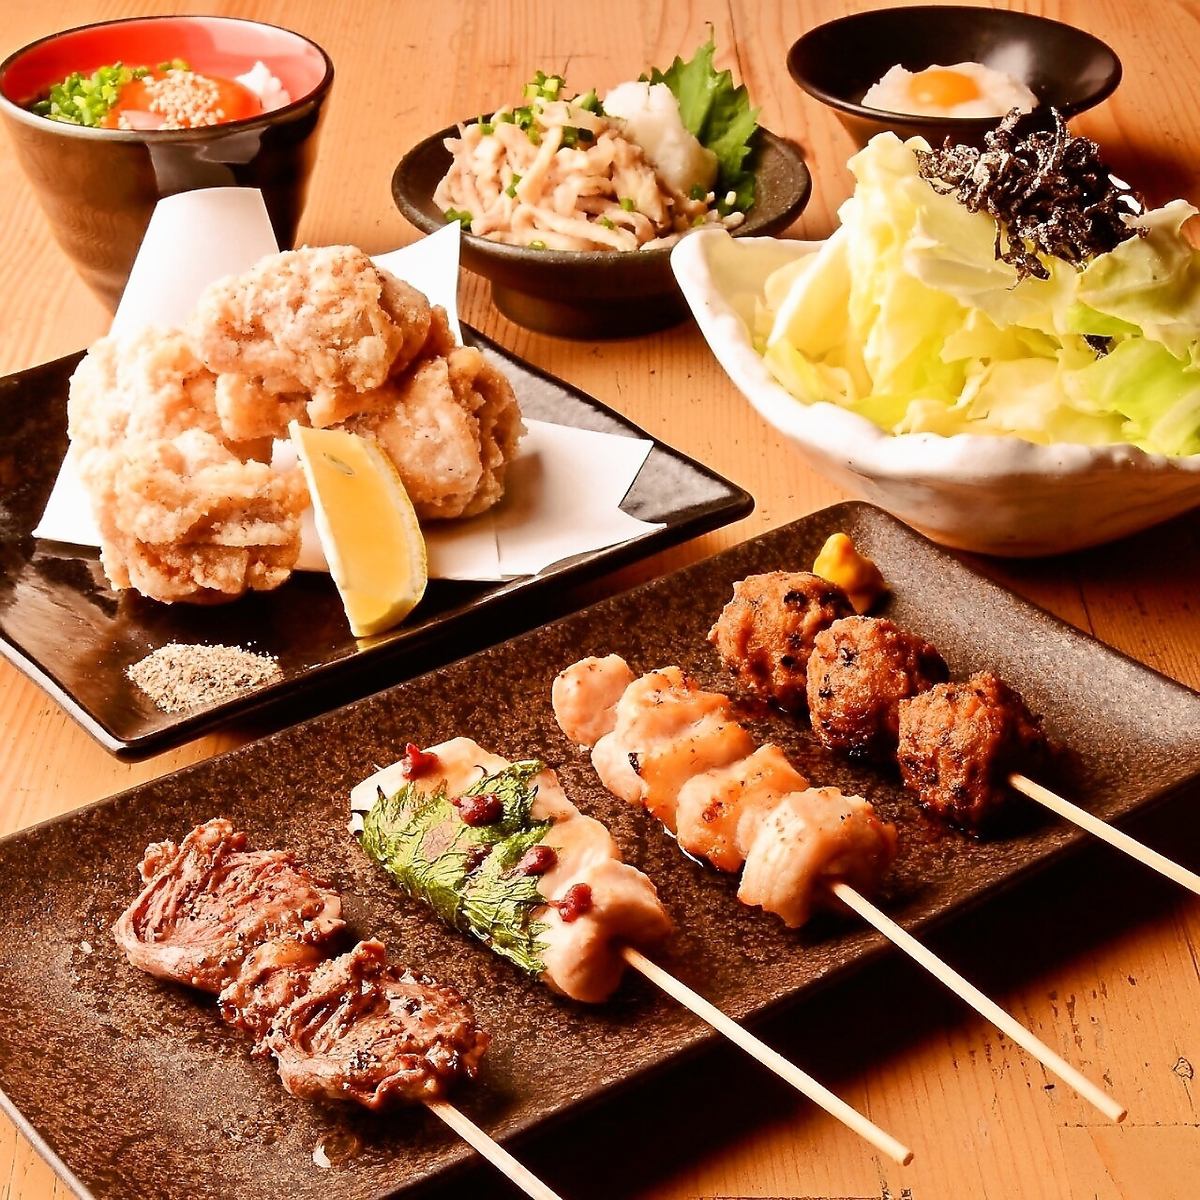 Yakitori grilled over binchotan charcoal is exquisite! Crispy on the outside and juicy on the inside!